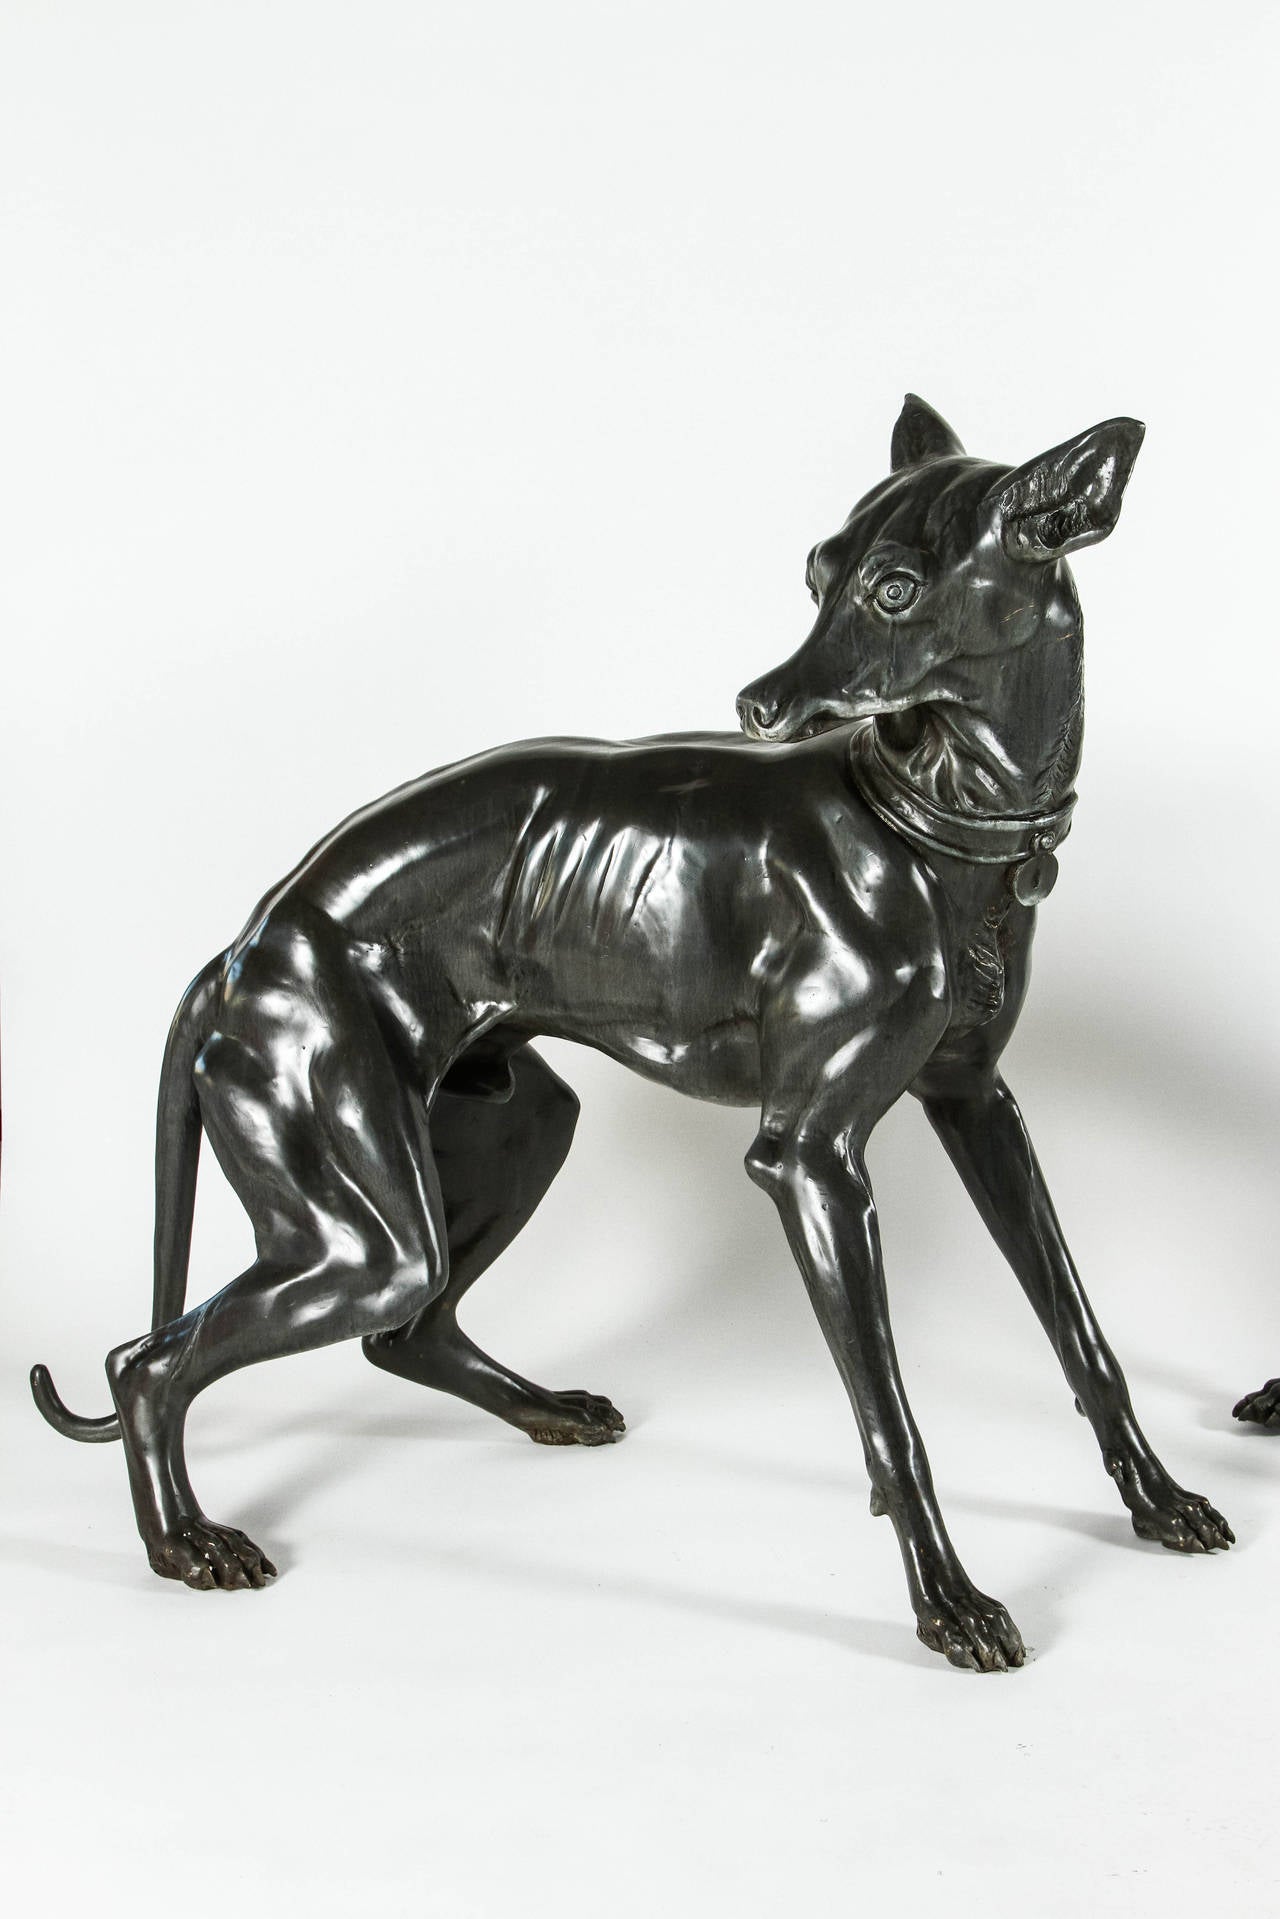 This fierce pair of bronze dogs would be impressive flanking an entry or drive. They have been thoroughly cleaned and hand waxed but do show some signs of their life outdoors. Heavy and substantial sculptures with very realistic details. The bronze